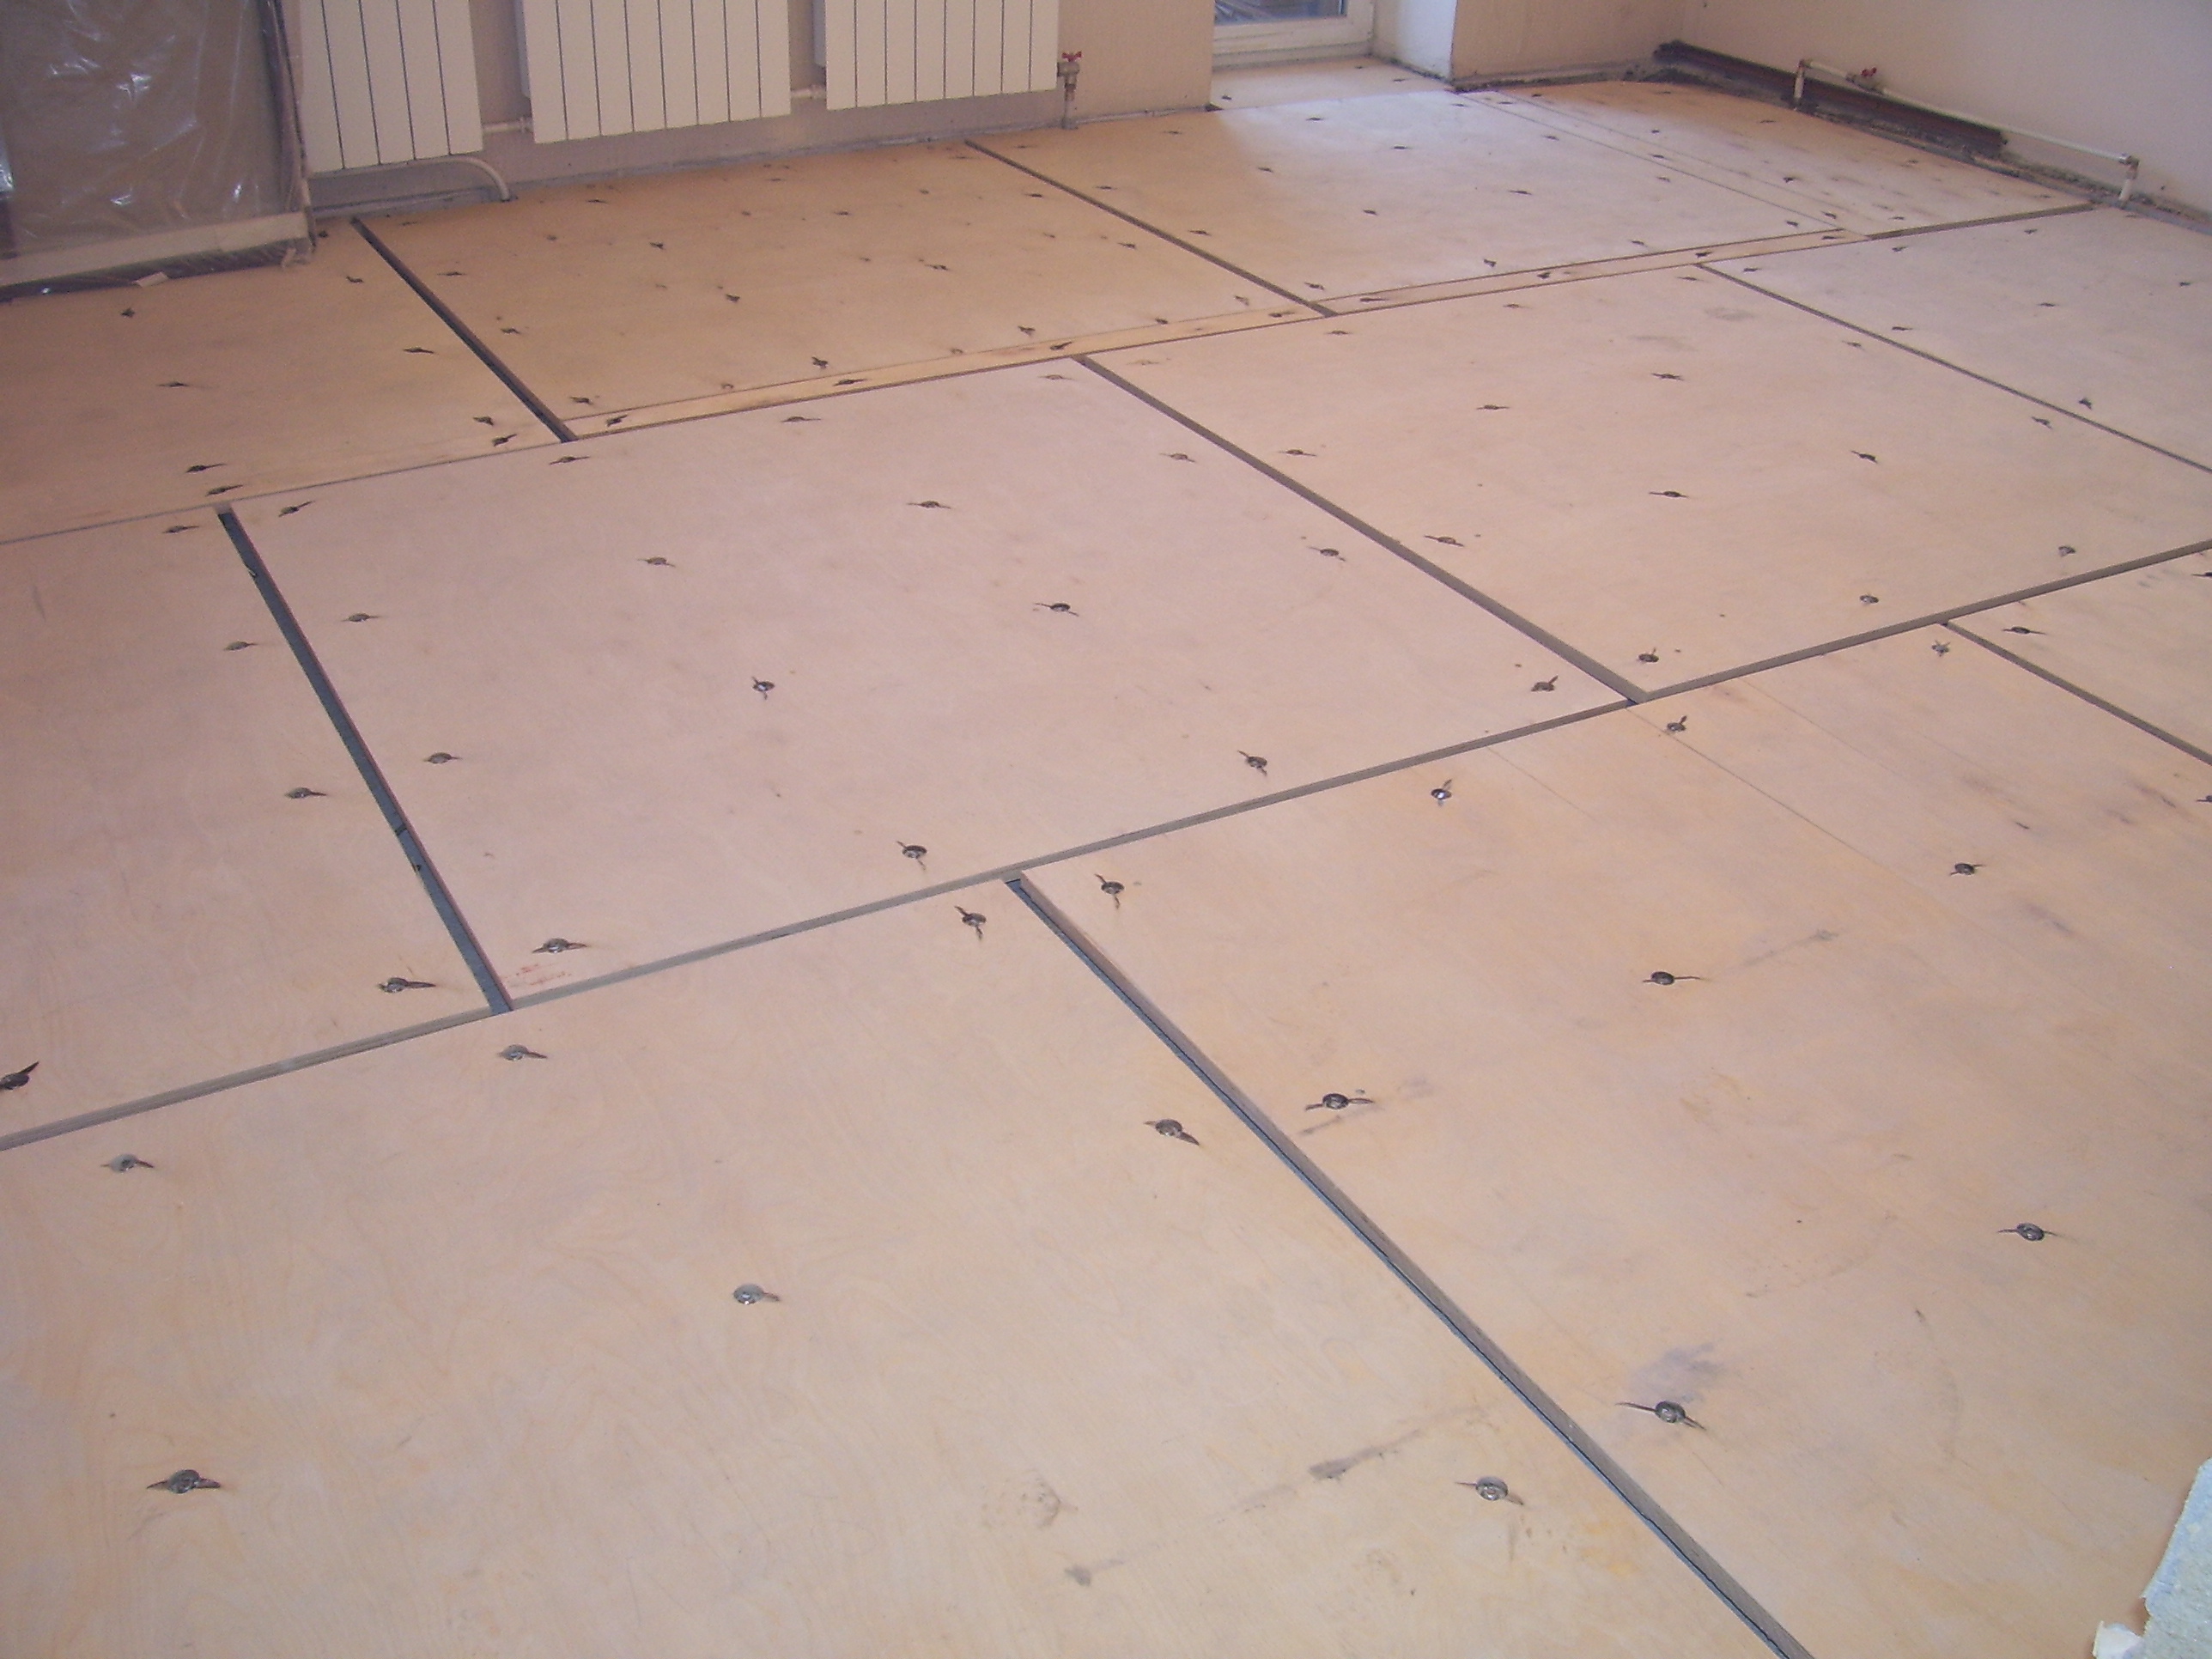 Fastening plywood to the floor screed - choose the right composition